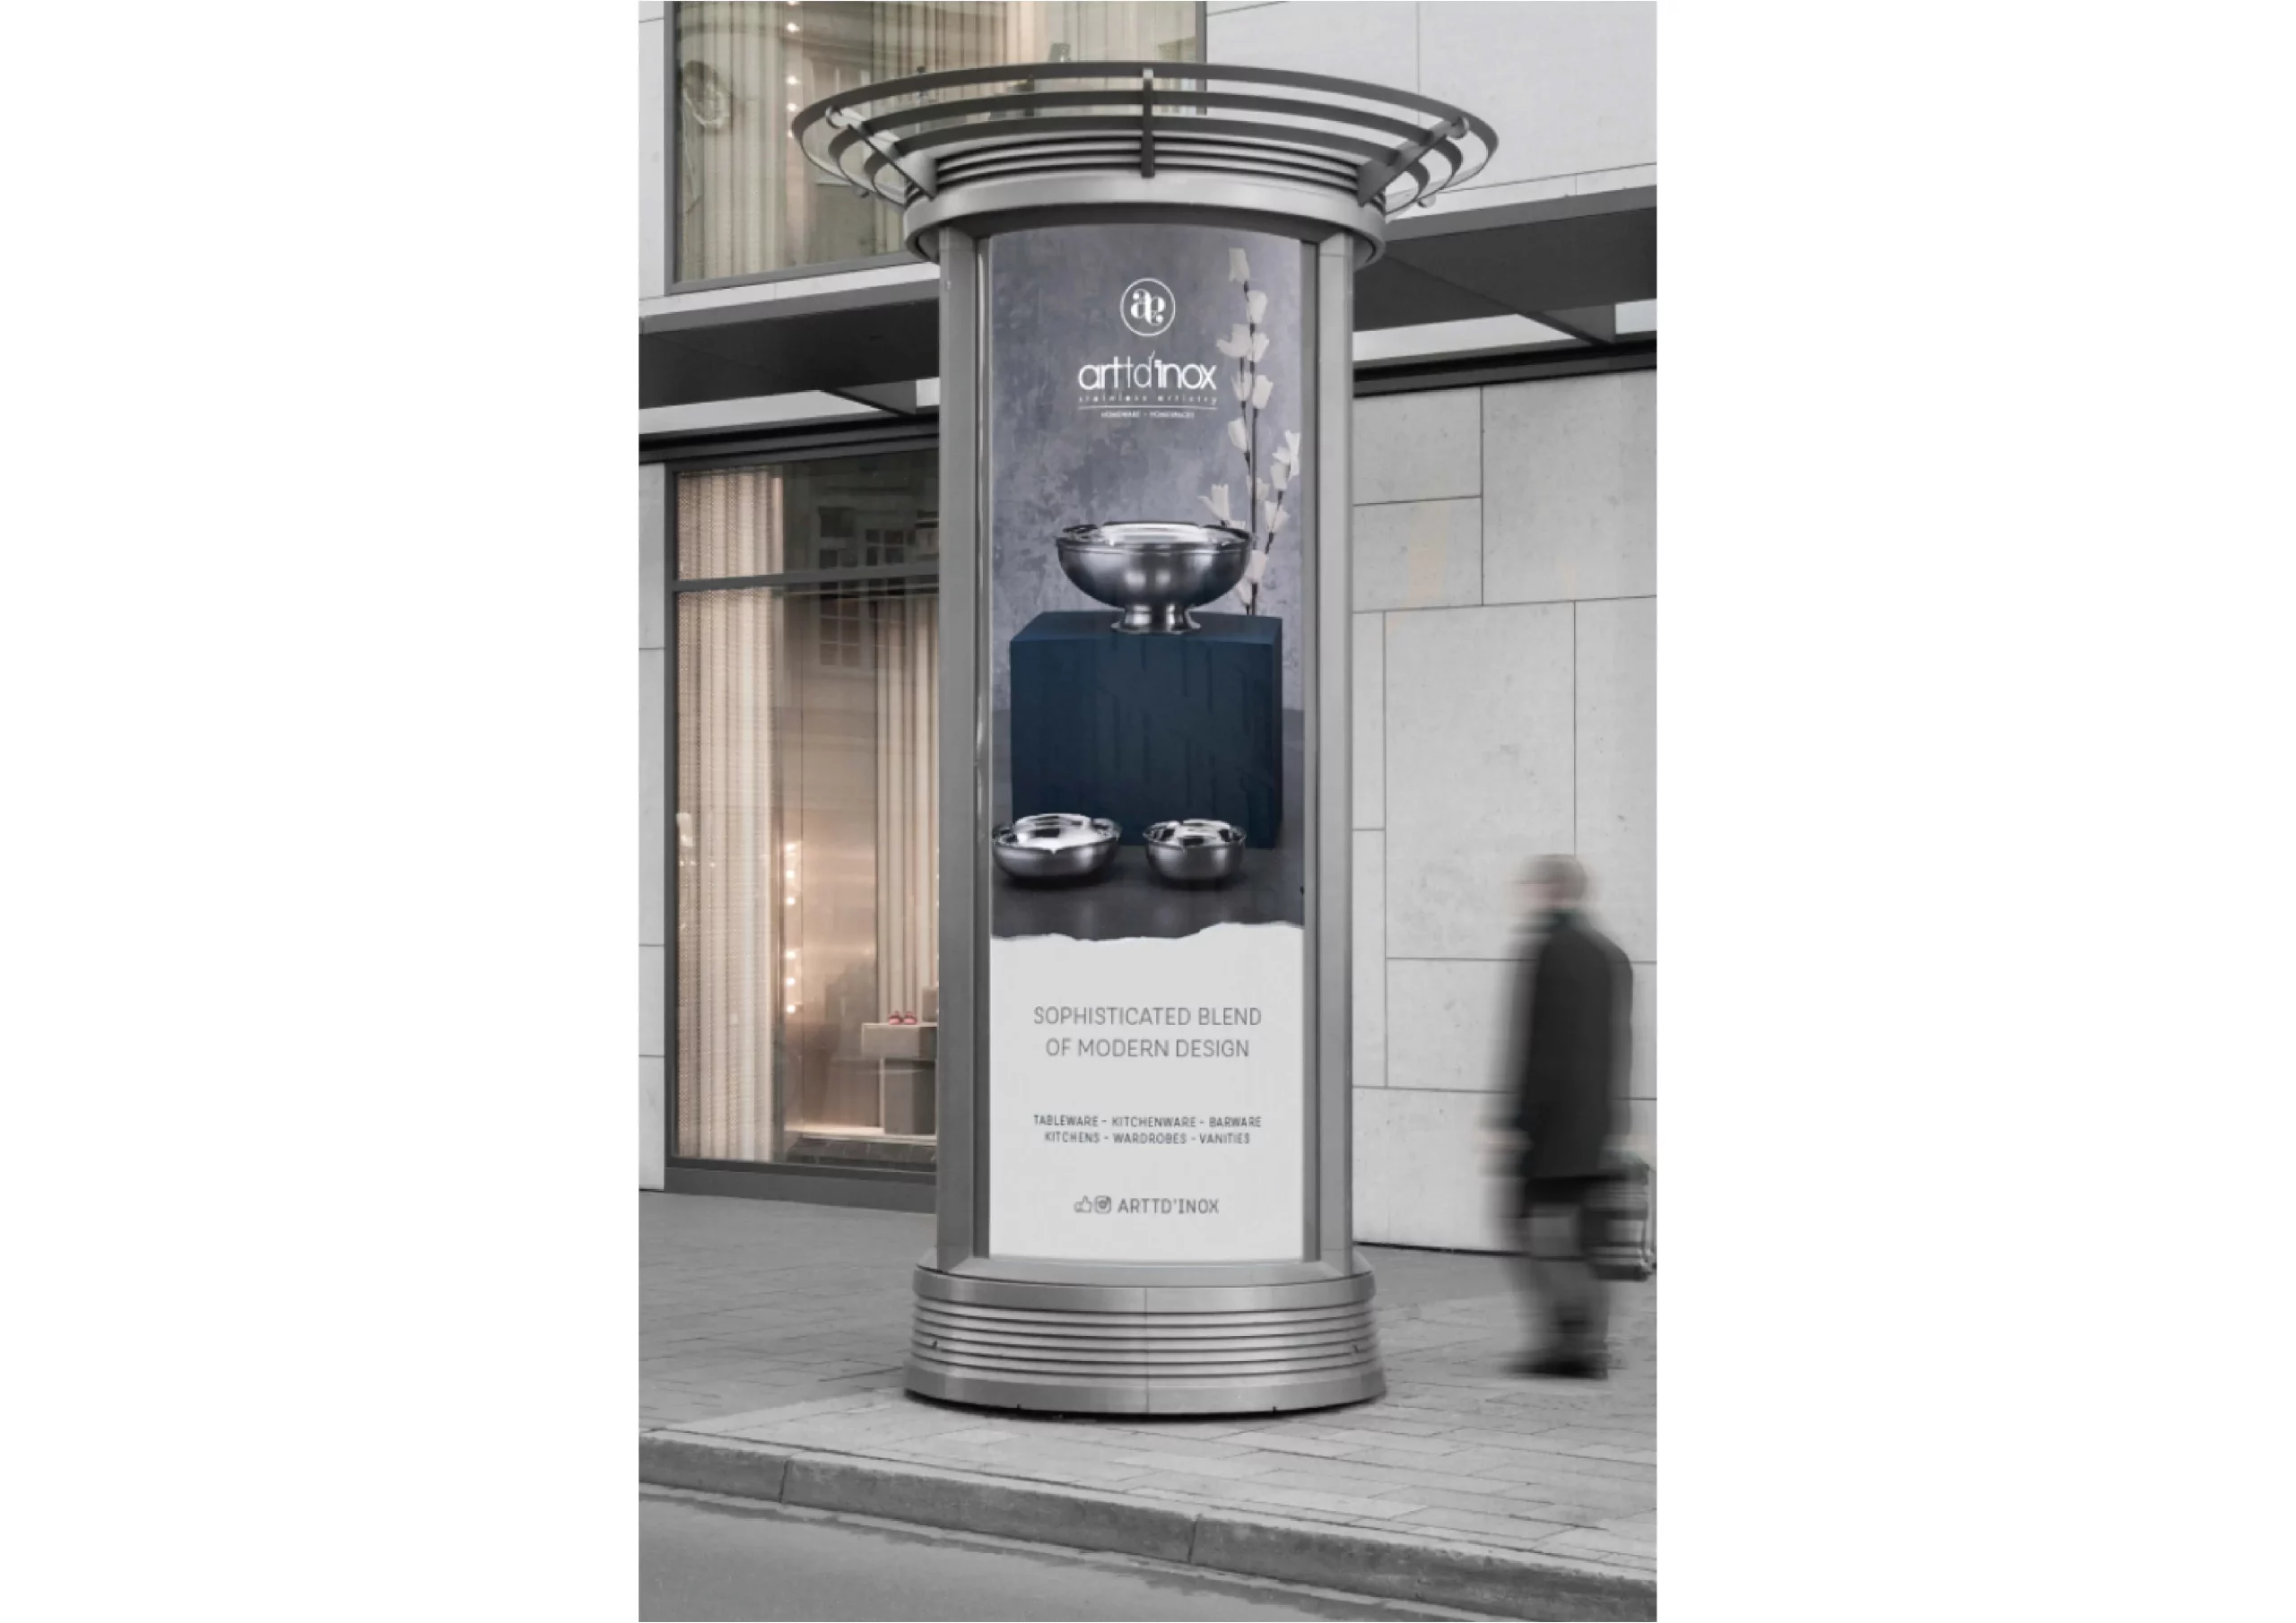 An advertisement for mercedes benz on a pole in front of a building.